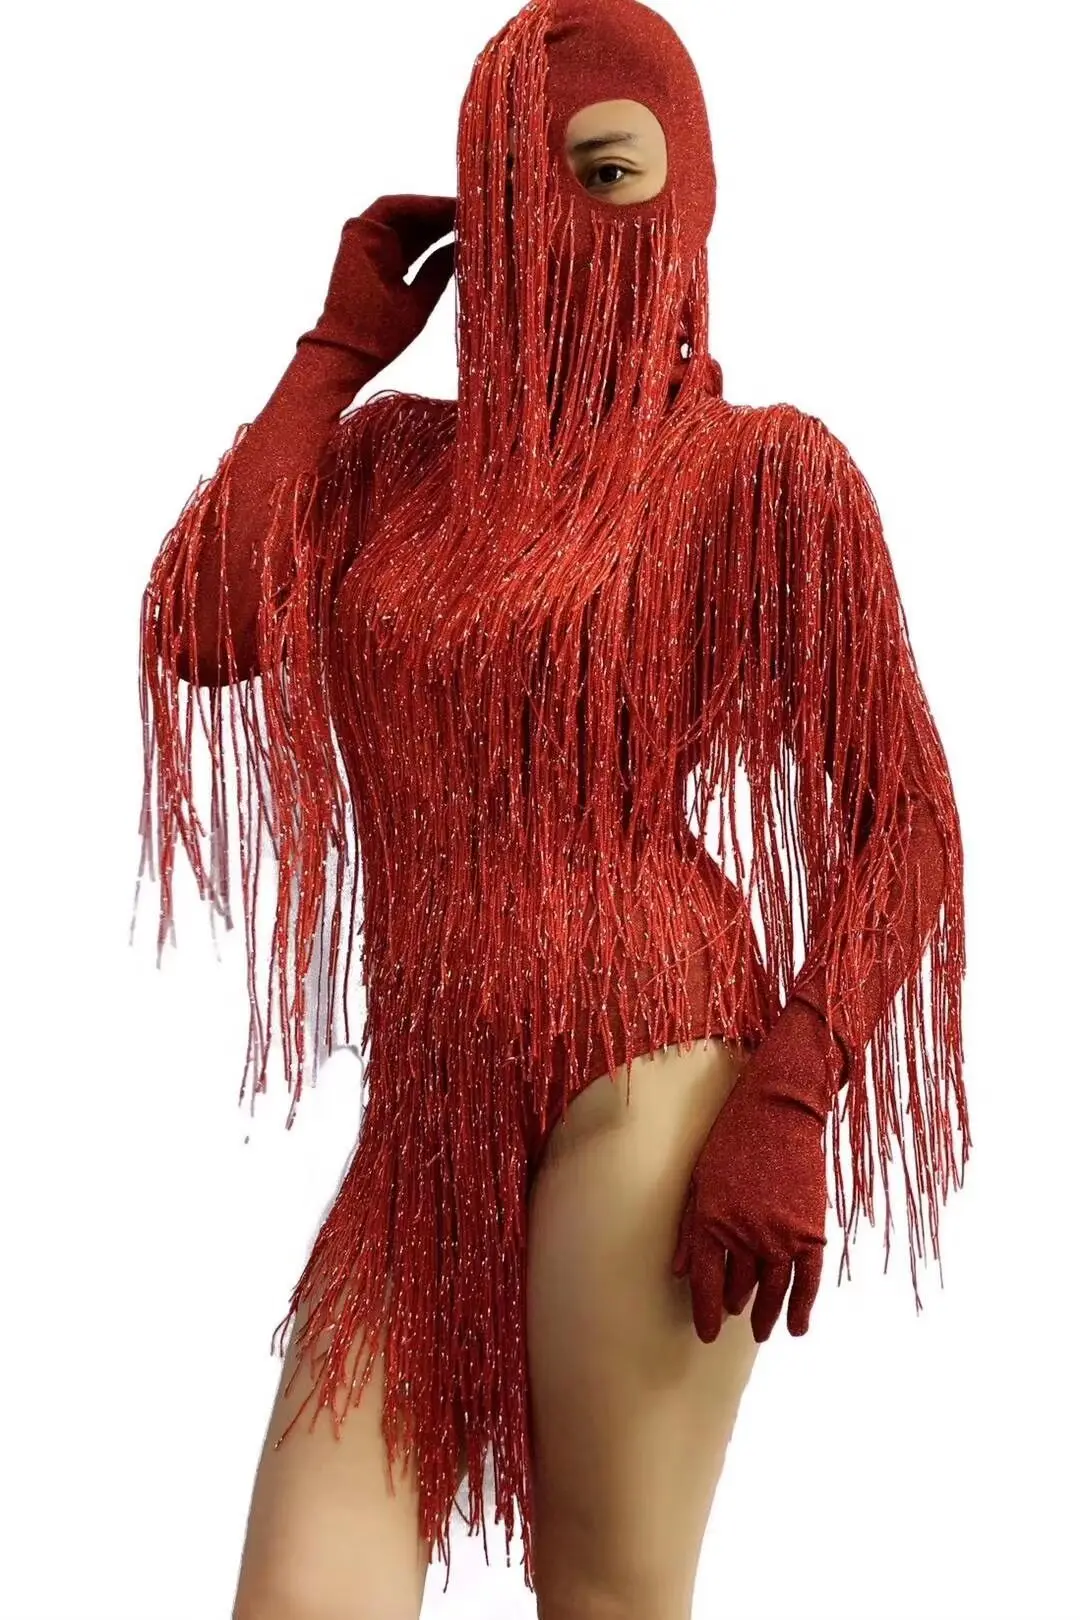 Red Full Fringe Long Gloves Bodysuit Headdress Birthday Outfits for Women Sexy Club Dress Stage Wear Dance Performance Costume